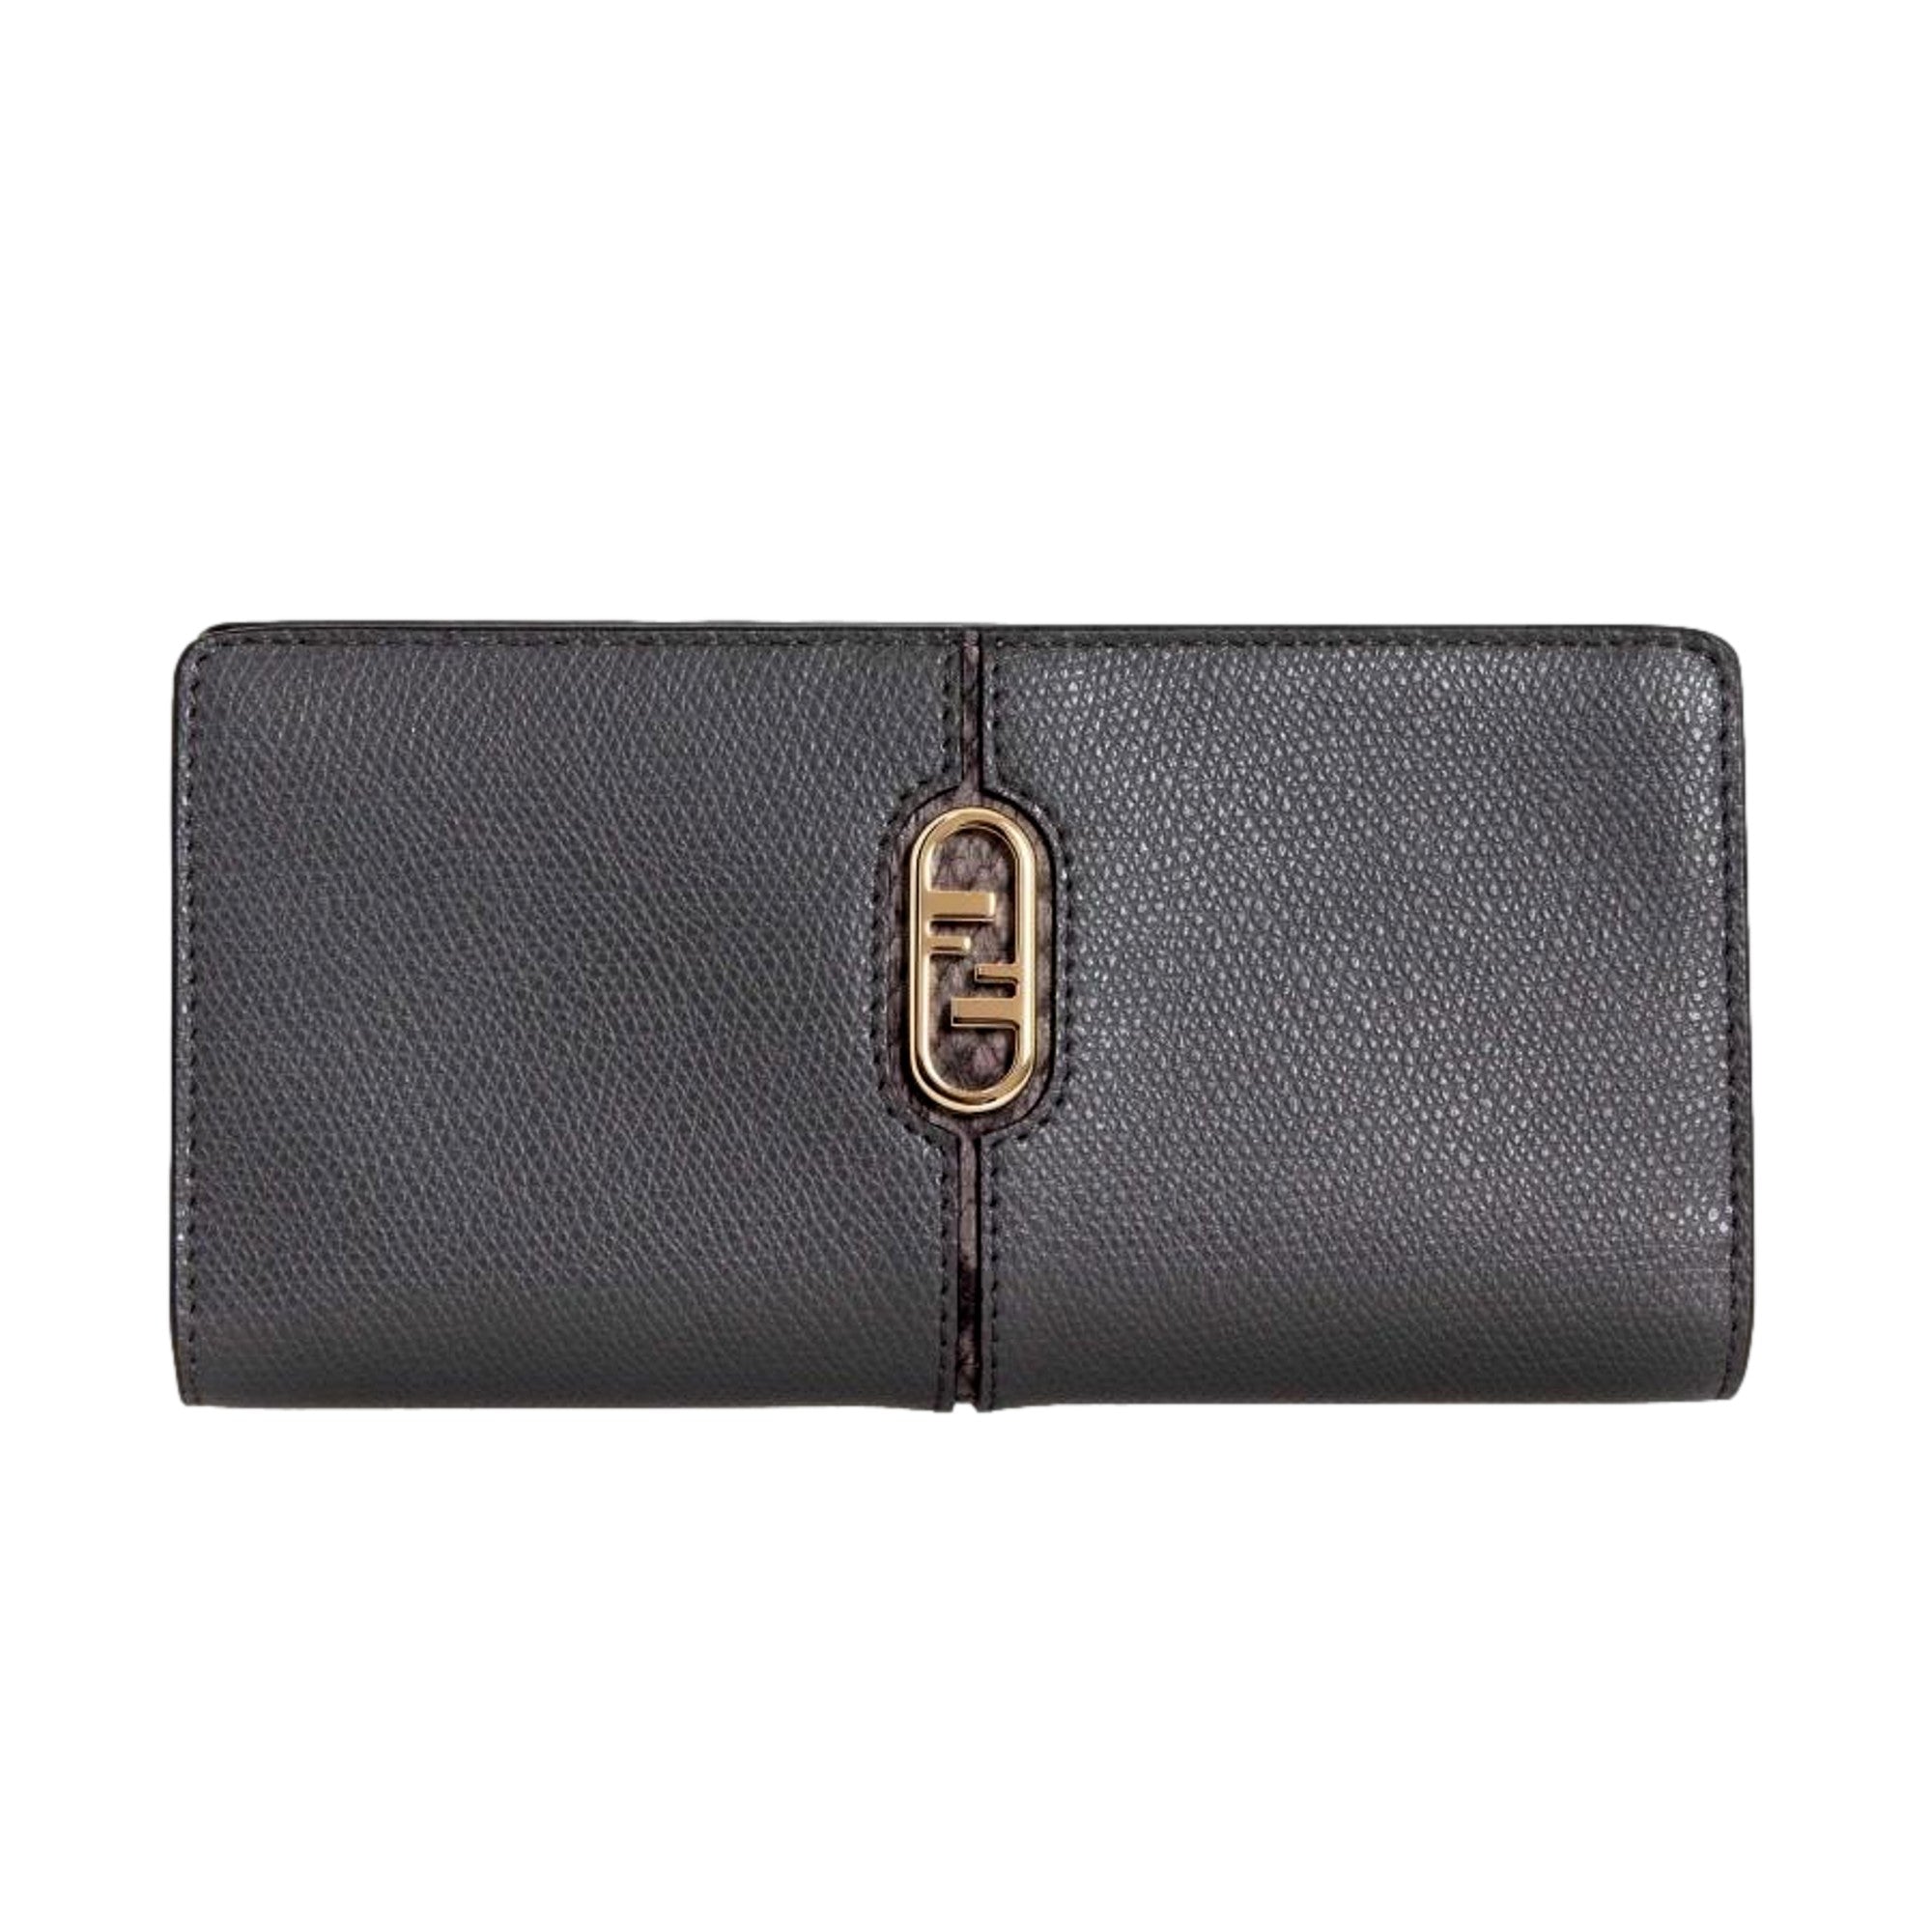 Fendi O'Lock Anthracite Gray and Python Print Leather Snap Continental Wallet